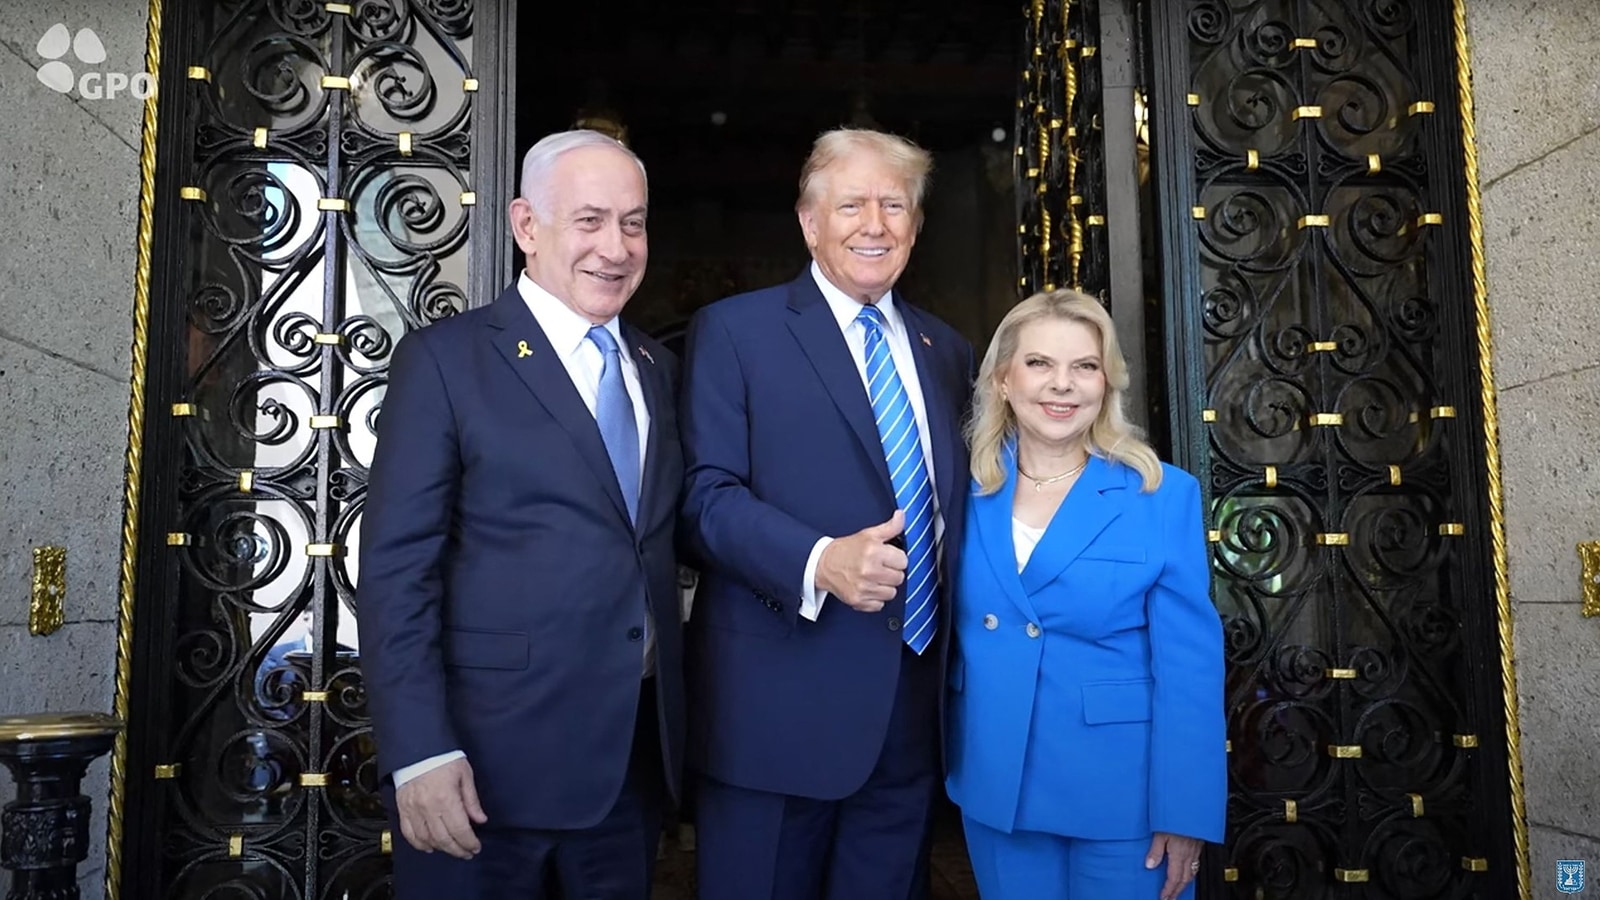 Trump meets with Israel’s PM Netanyahu at Mar-a-Lago, says ‘Third World War’ could happen if he loses